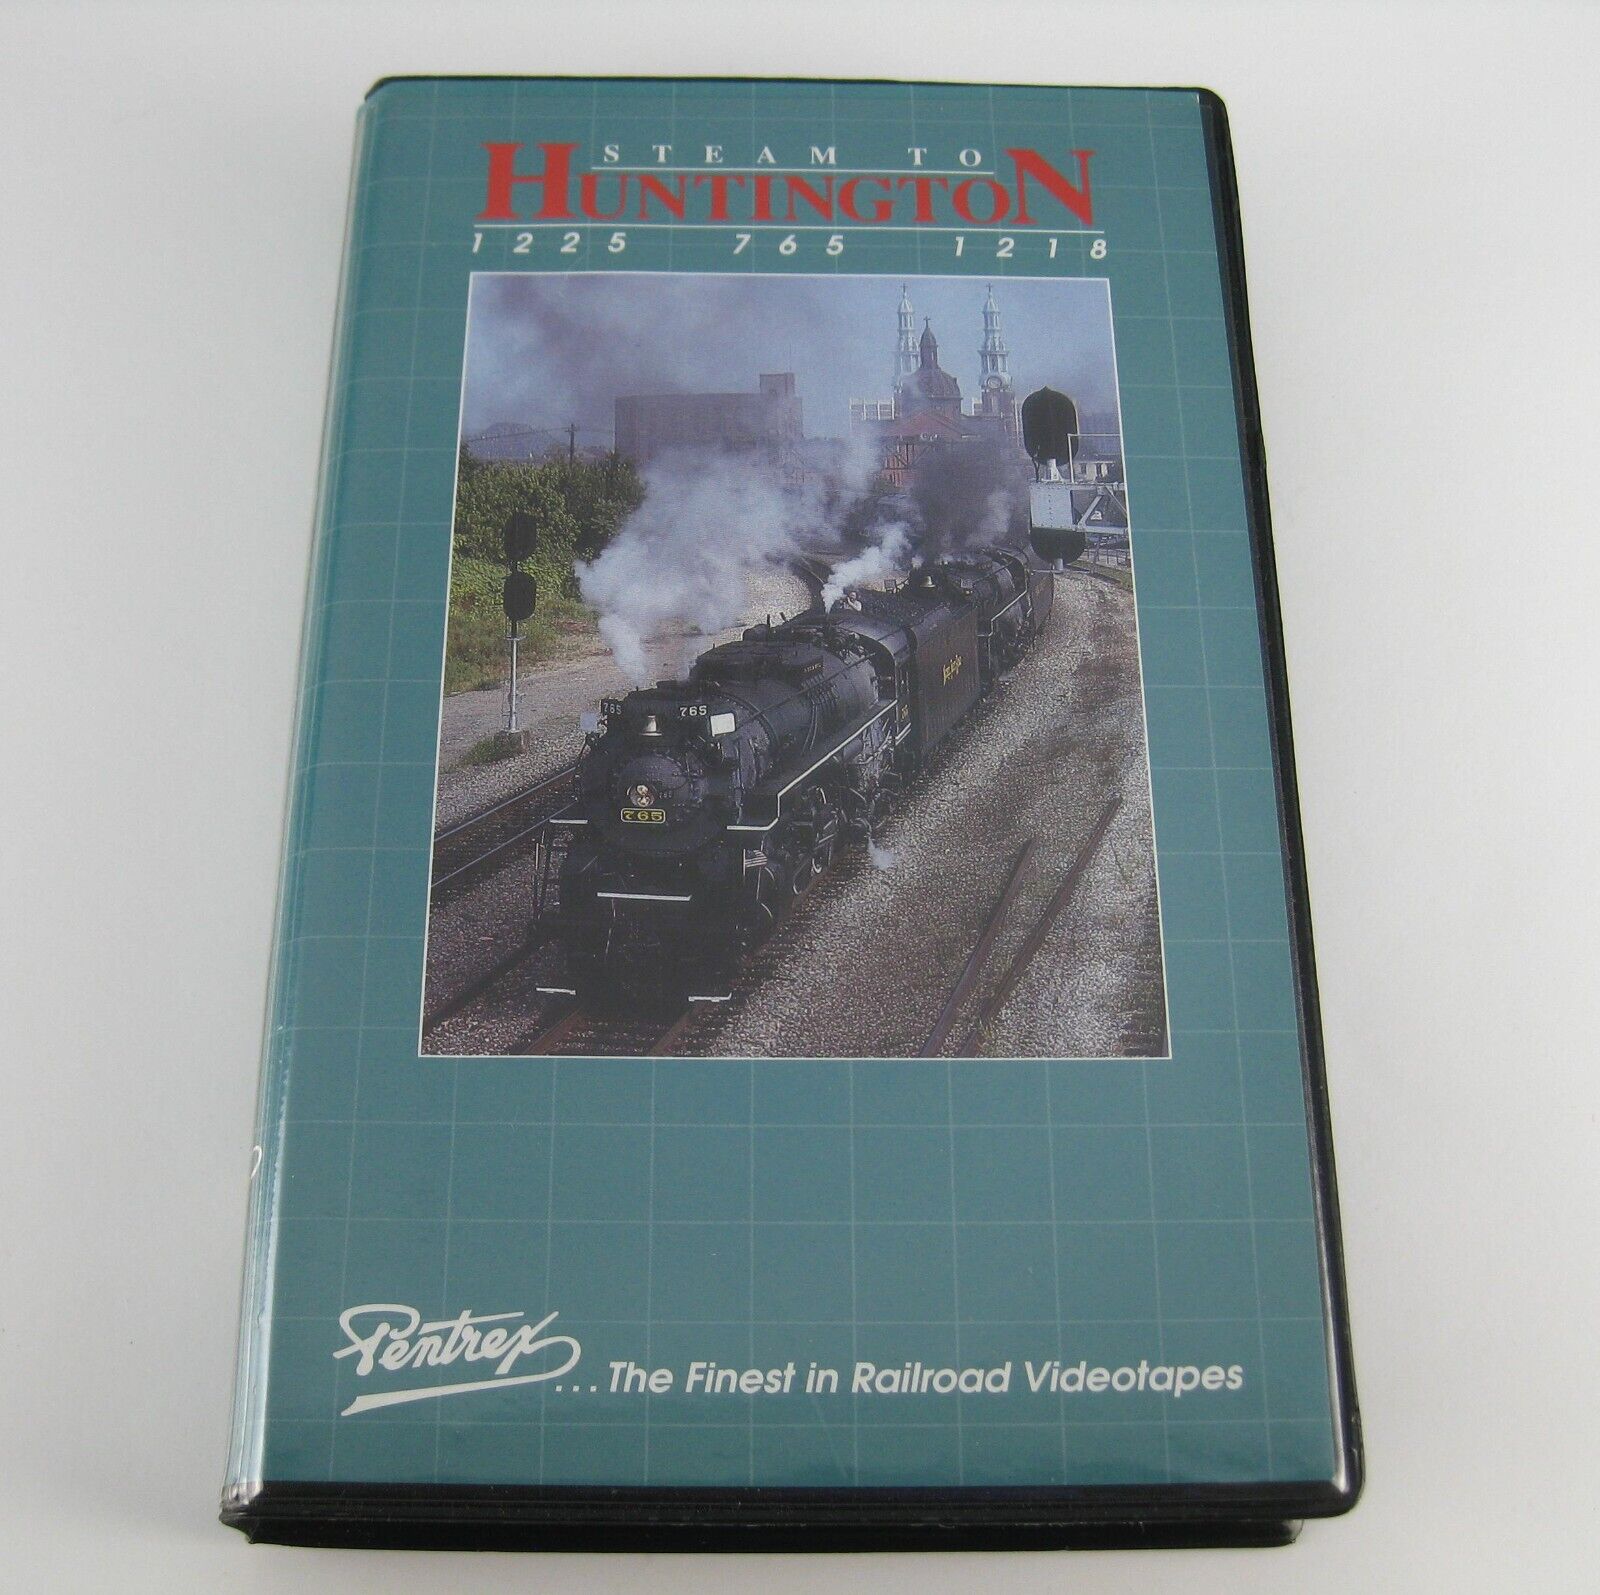 Steam to Huntington 1225 765 1218 Pentrex VHS Vintage 1991 NRHS Convention